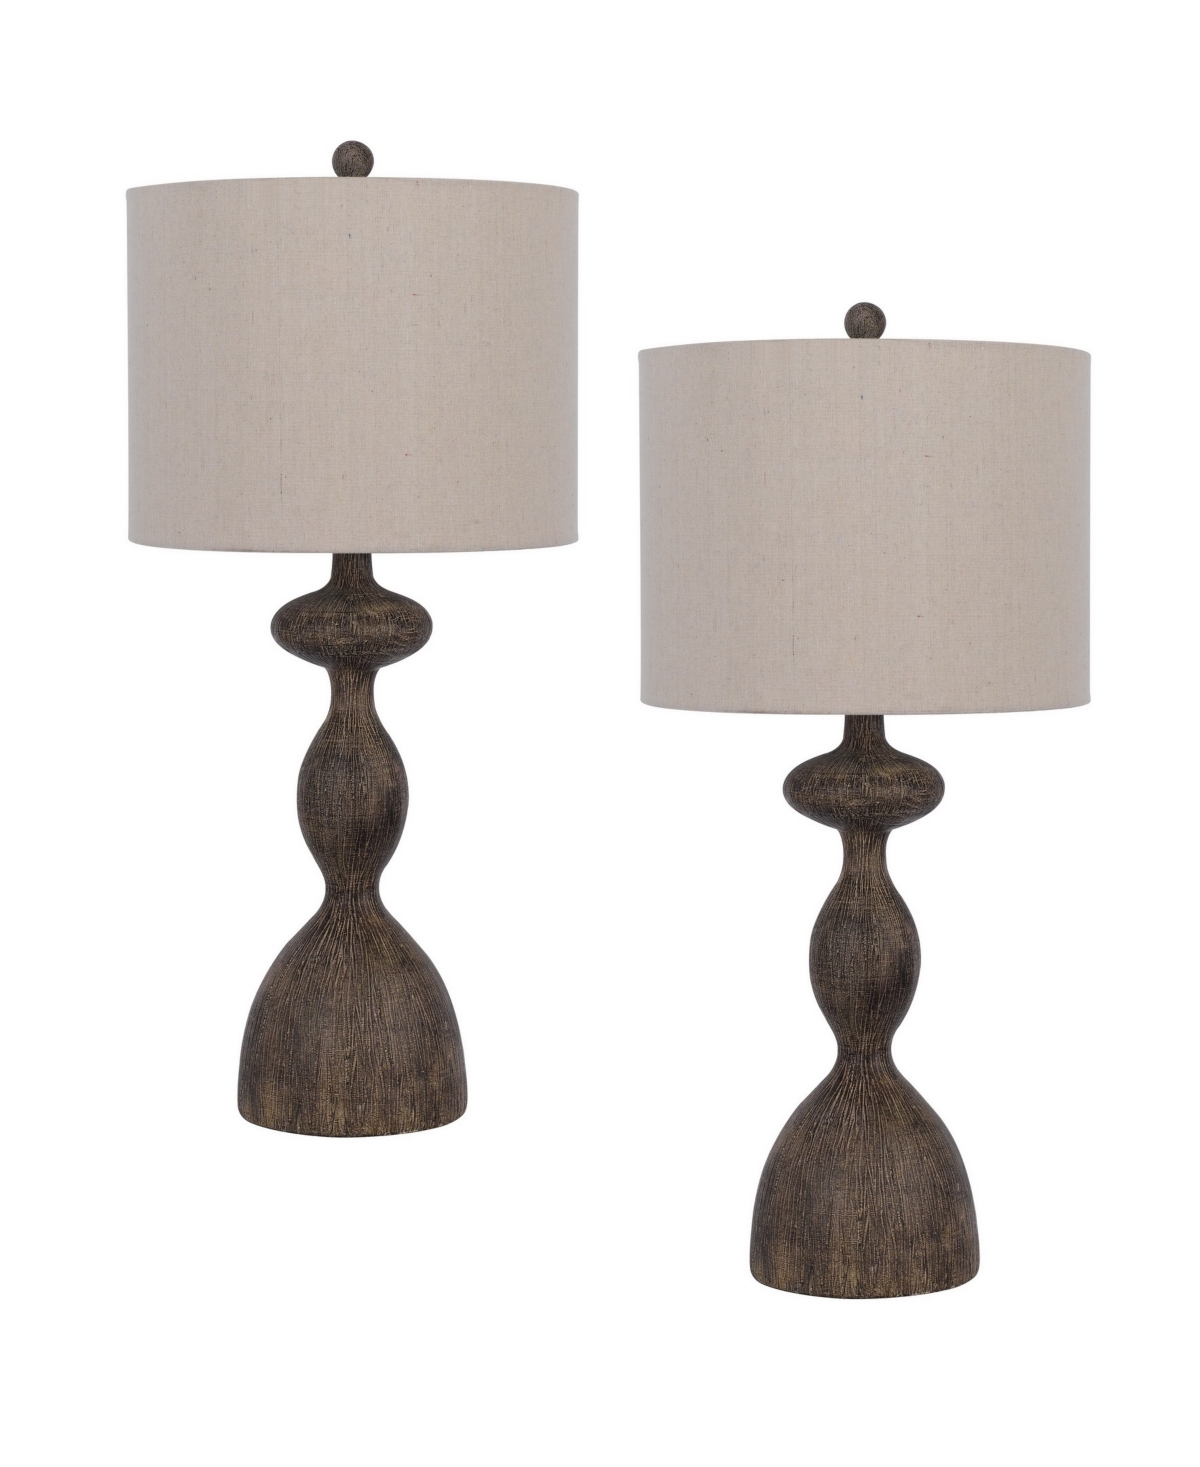 Cal Lighting 29.5" Height Finish Resin Table Lamp Set In Distressed Wood